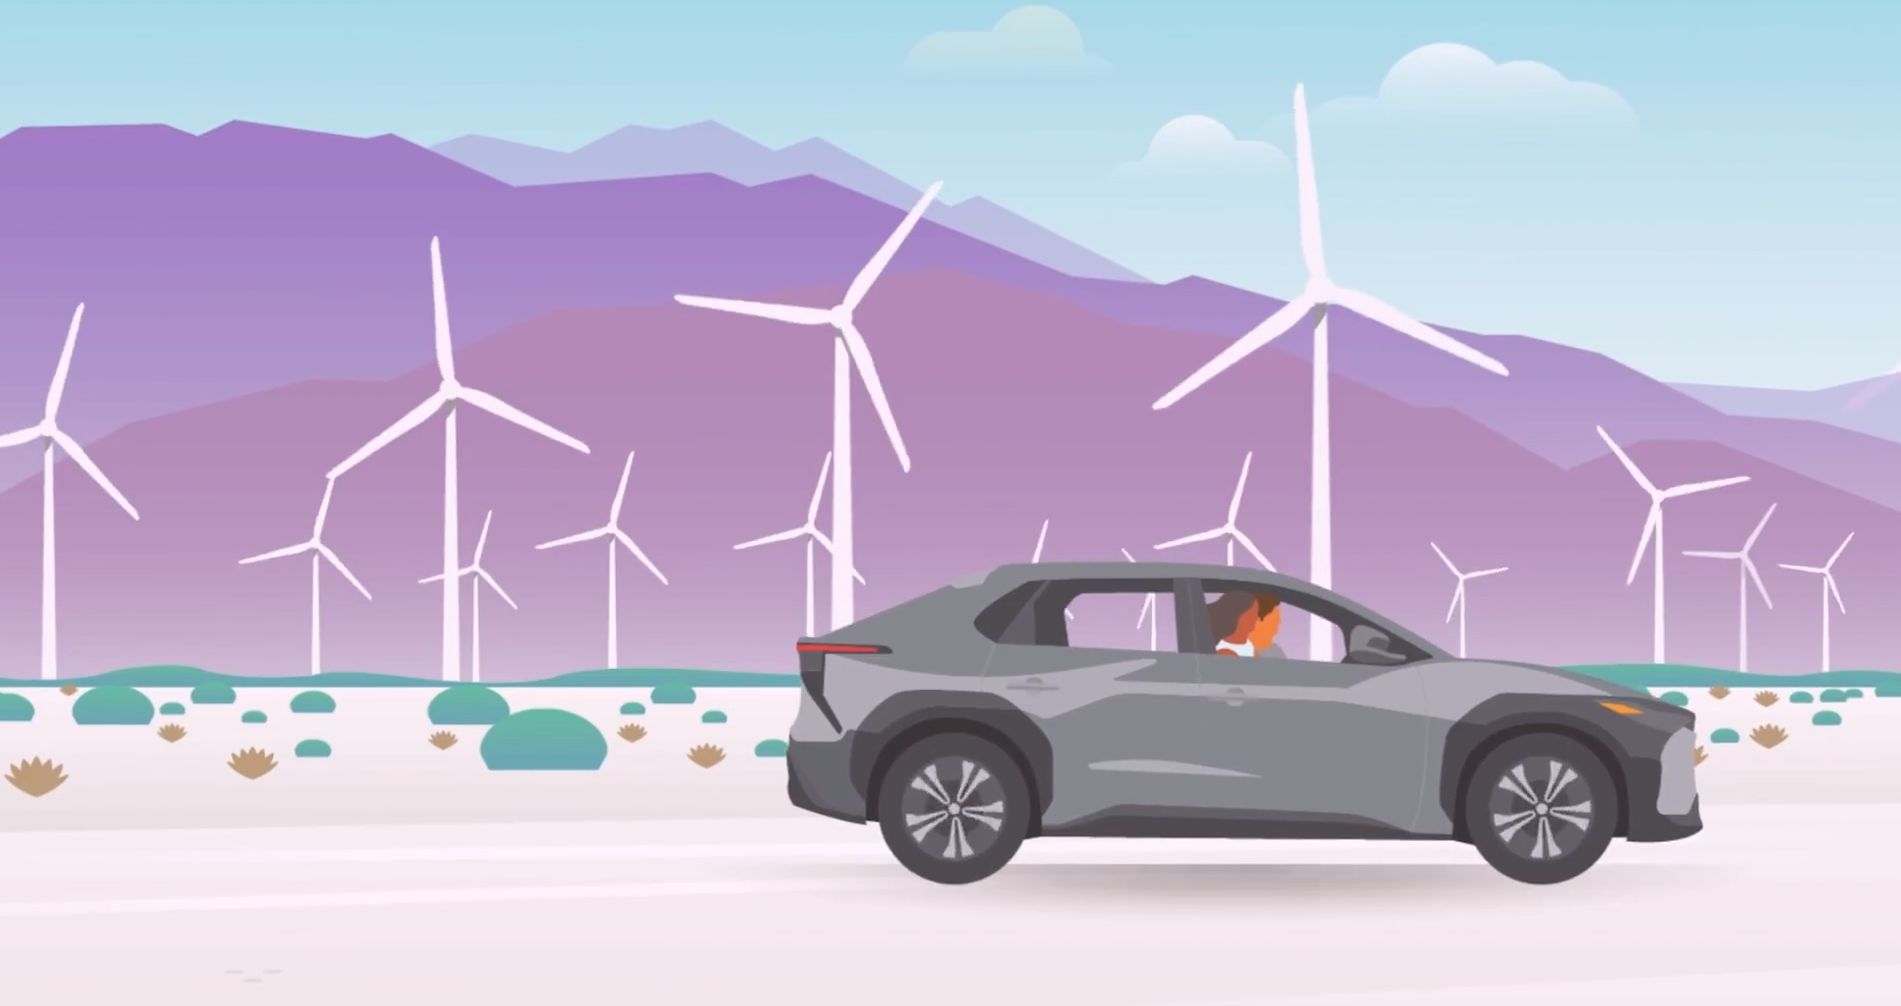 Graphic of Toyota vehicle in front of a wind farm